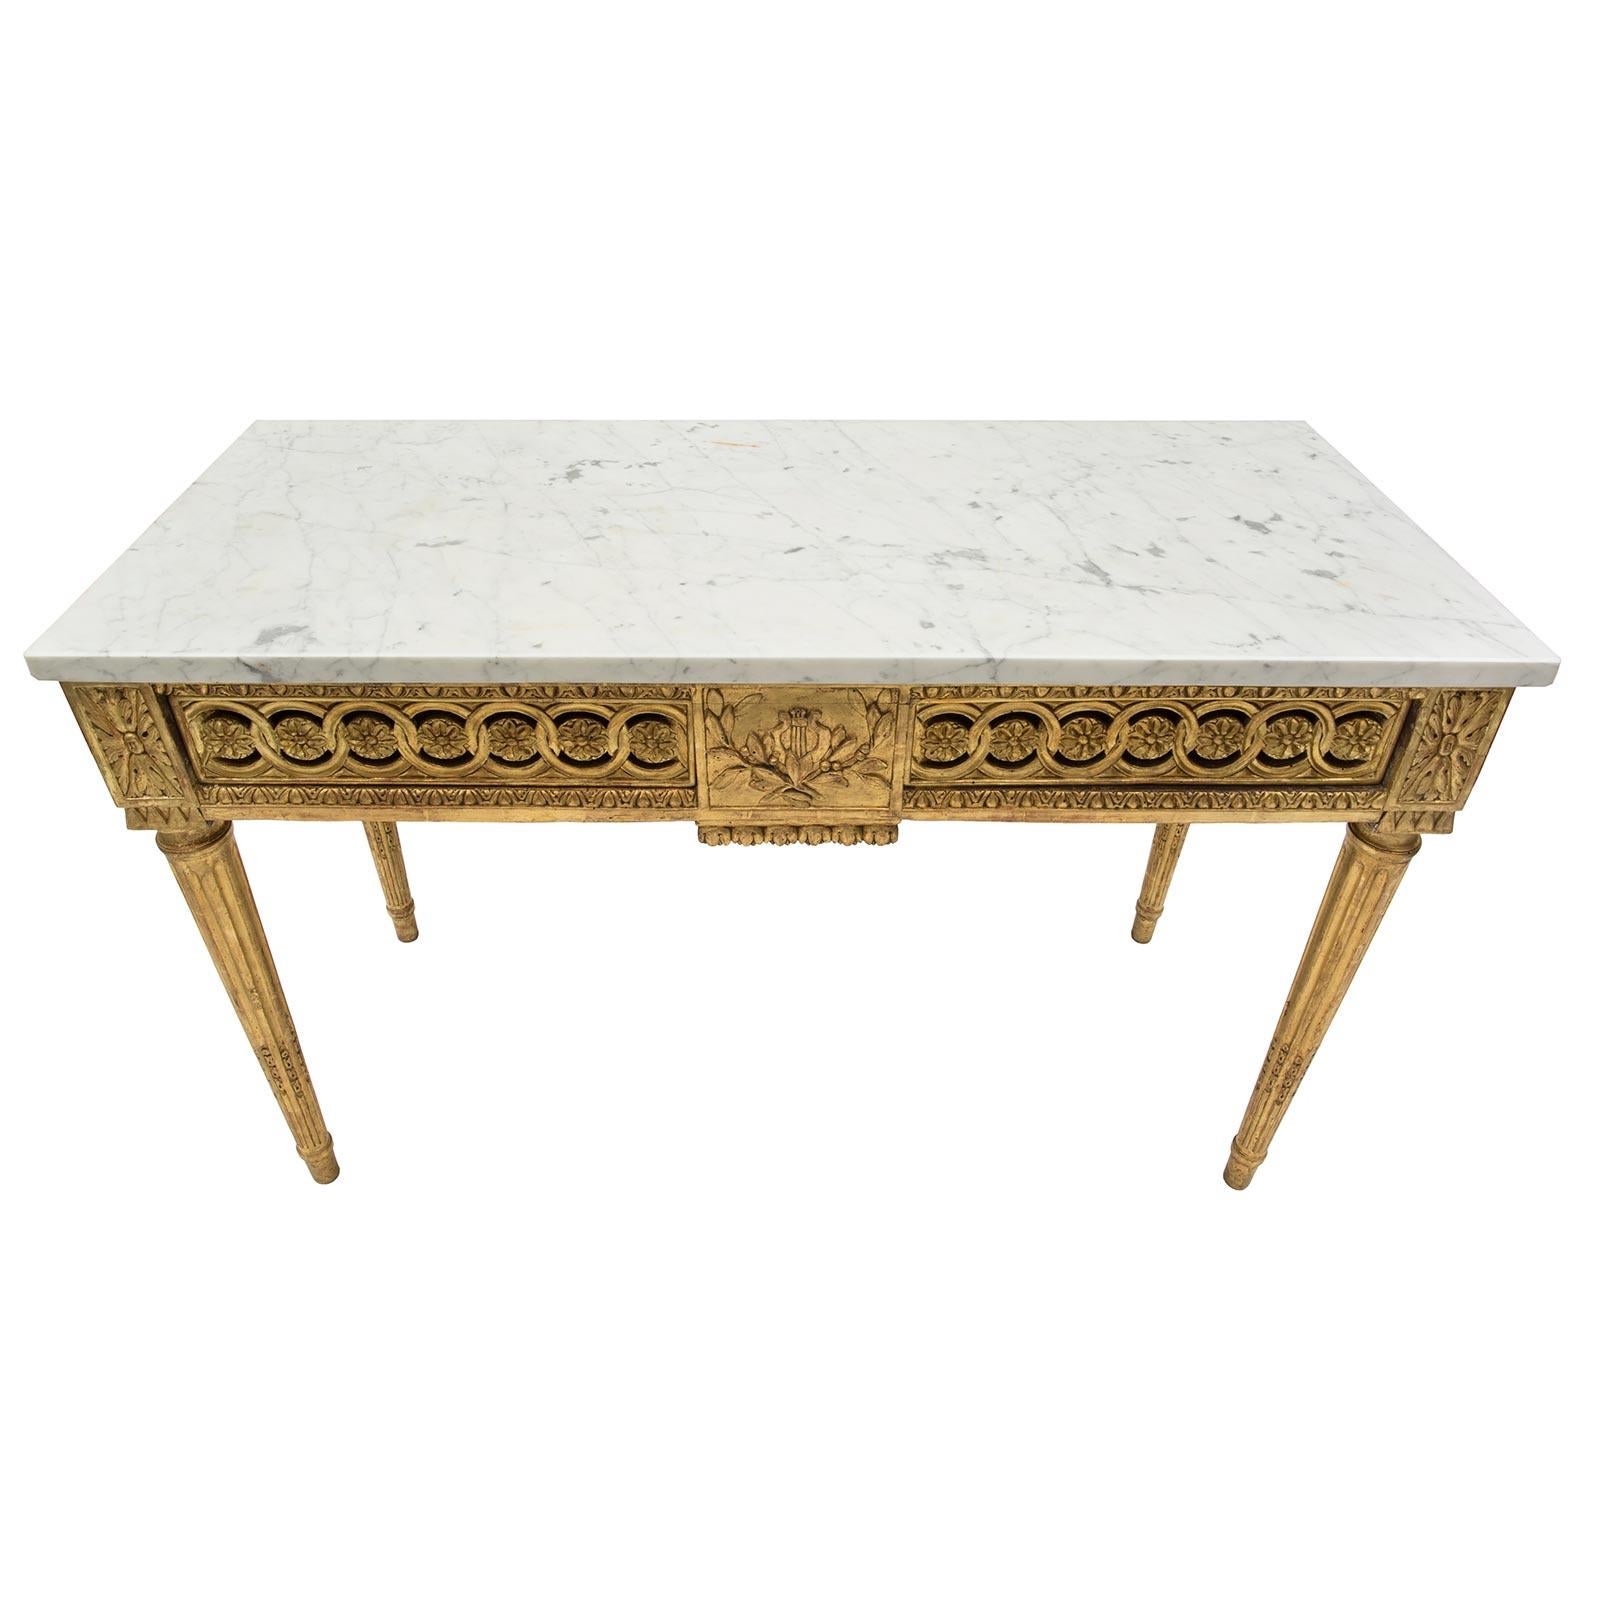 An exceptional French 18th century Louis XVI period giltwood and white Carrara marble center table with two drawers. The table is raised by elegant circular fluted tapered legs with finely carved fitted chandelles. The frieze displays block rosettes